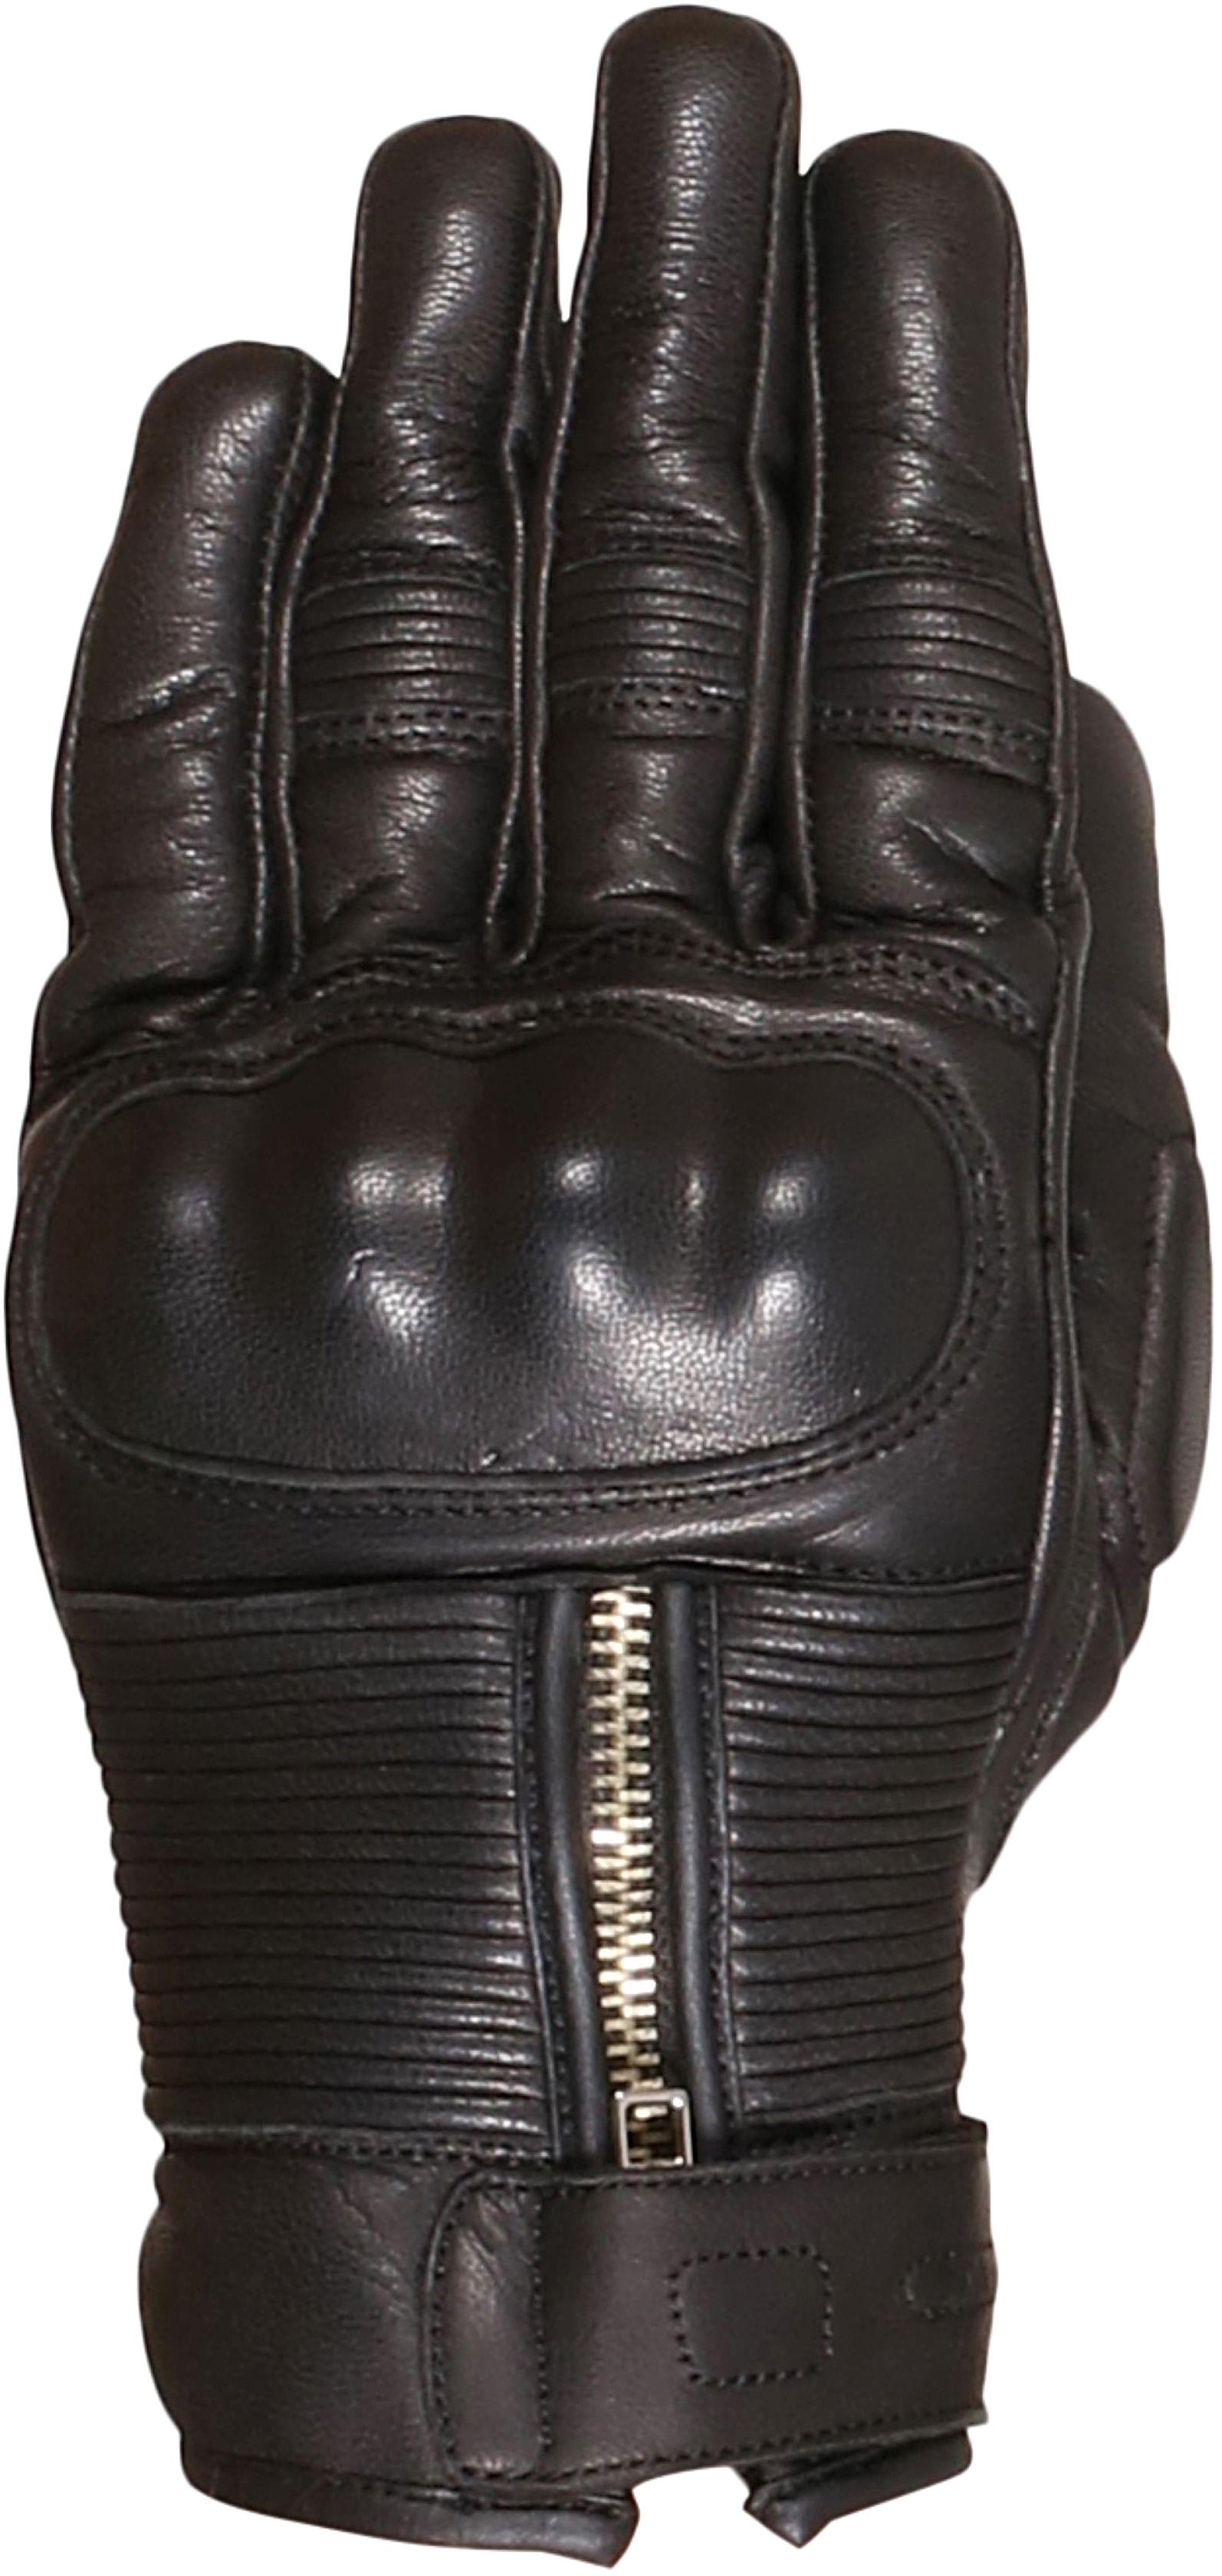 Weise Union Motorcycle Gloves - Black, M